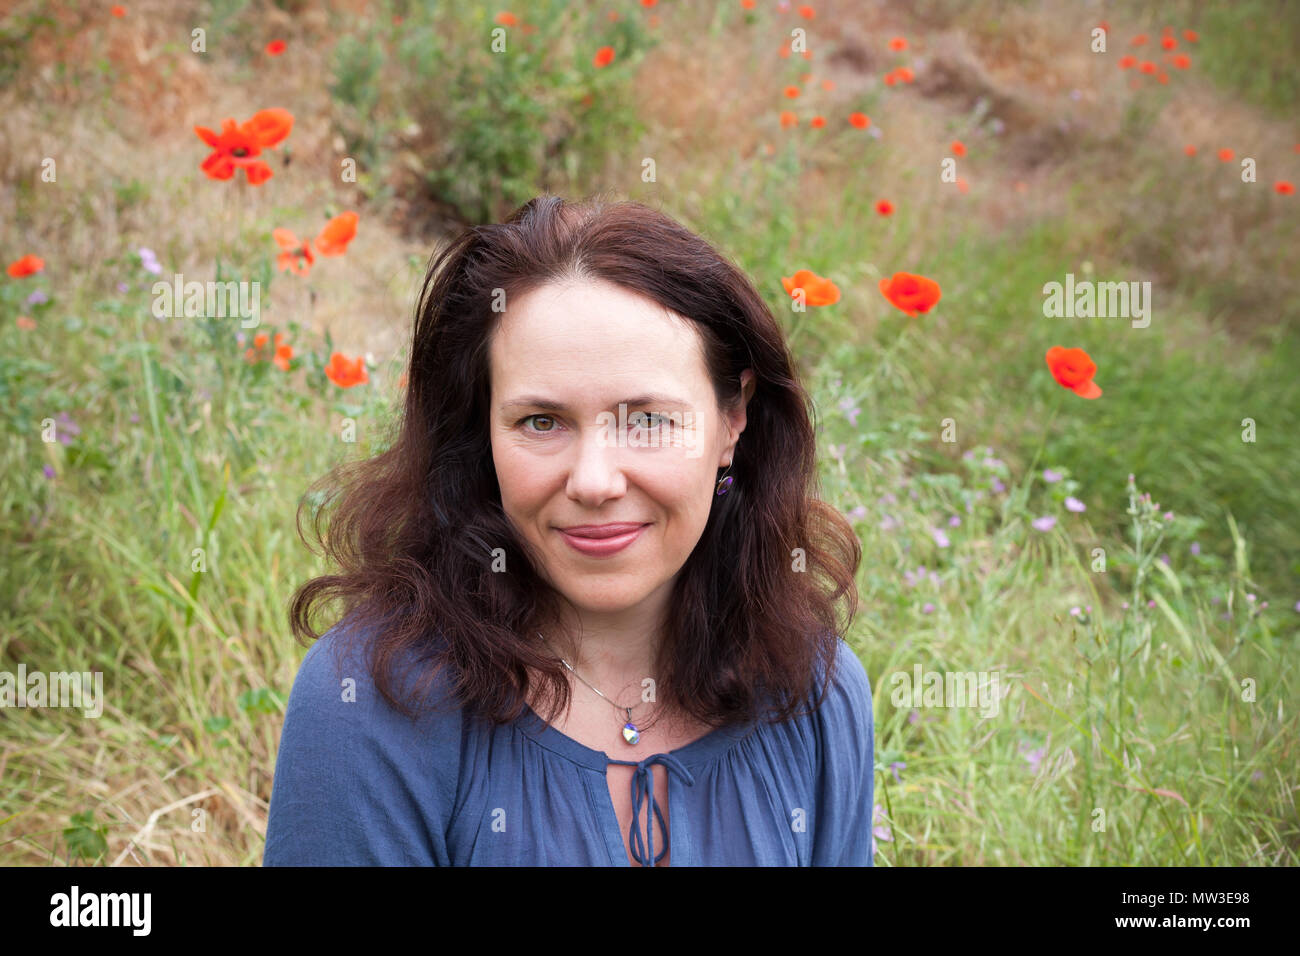 Outdoor portrait of smiling young European woman rests on a summer meadow with flowering poppies Stock Photo